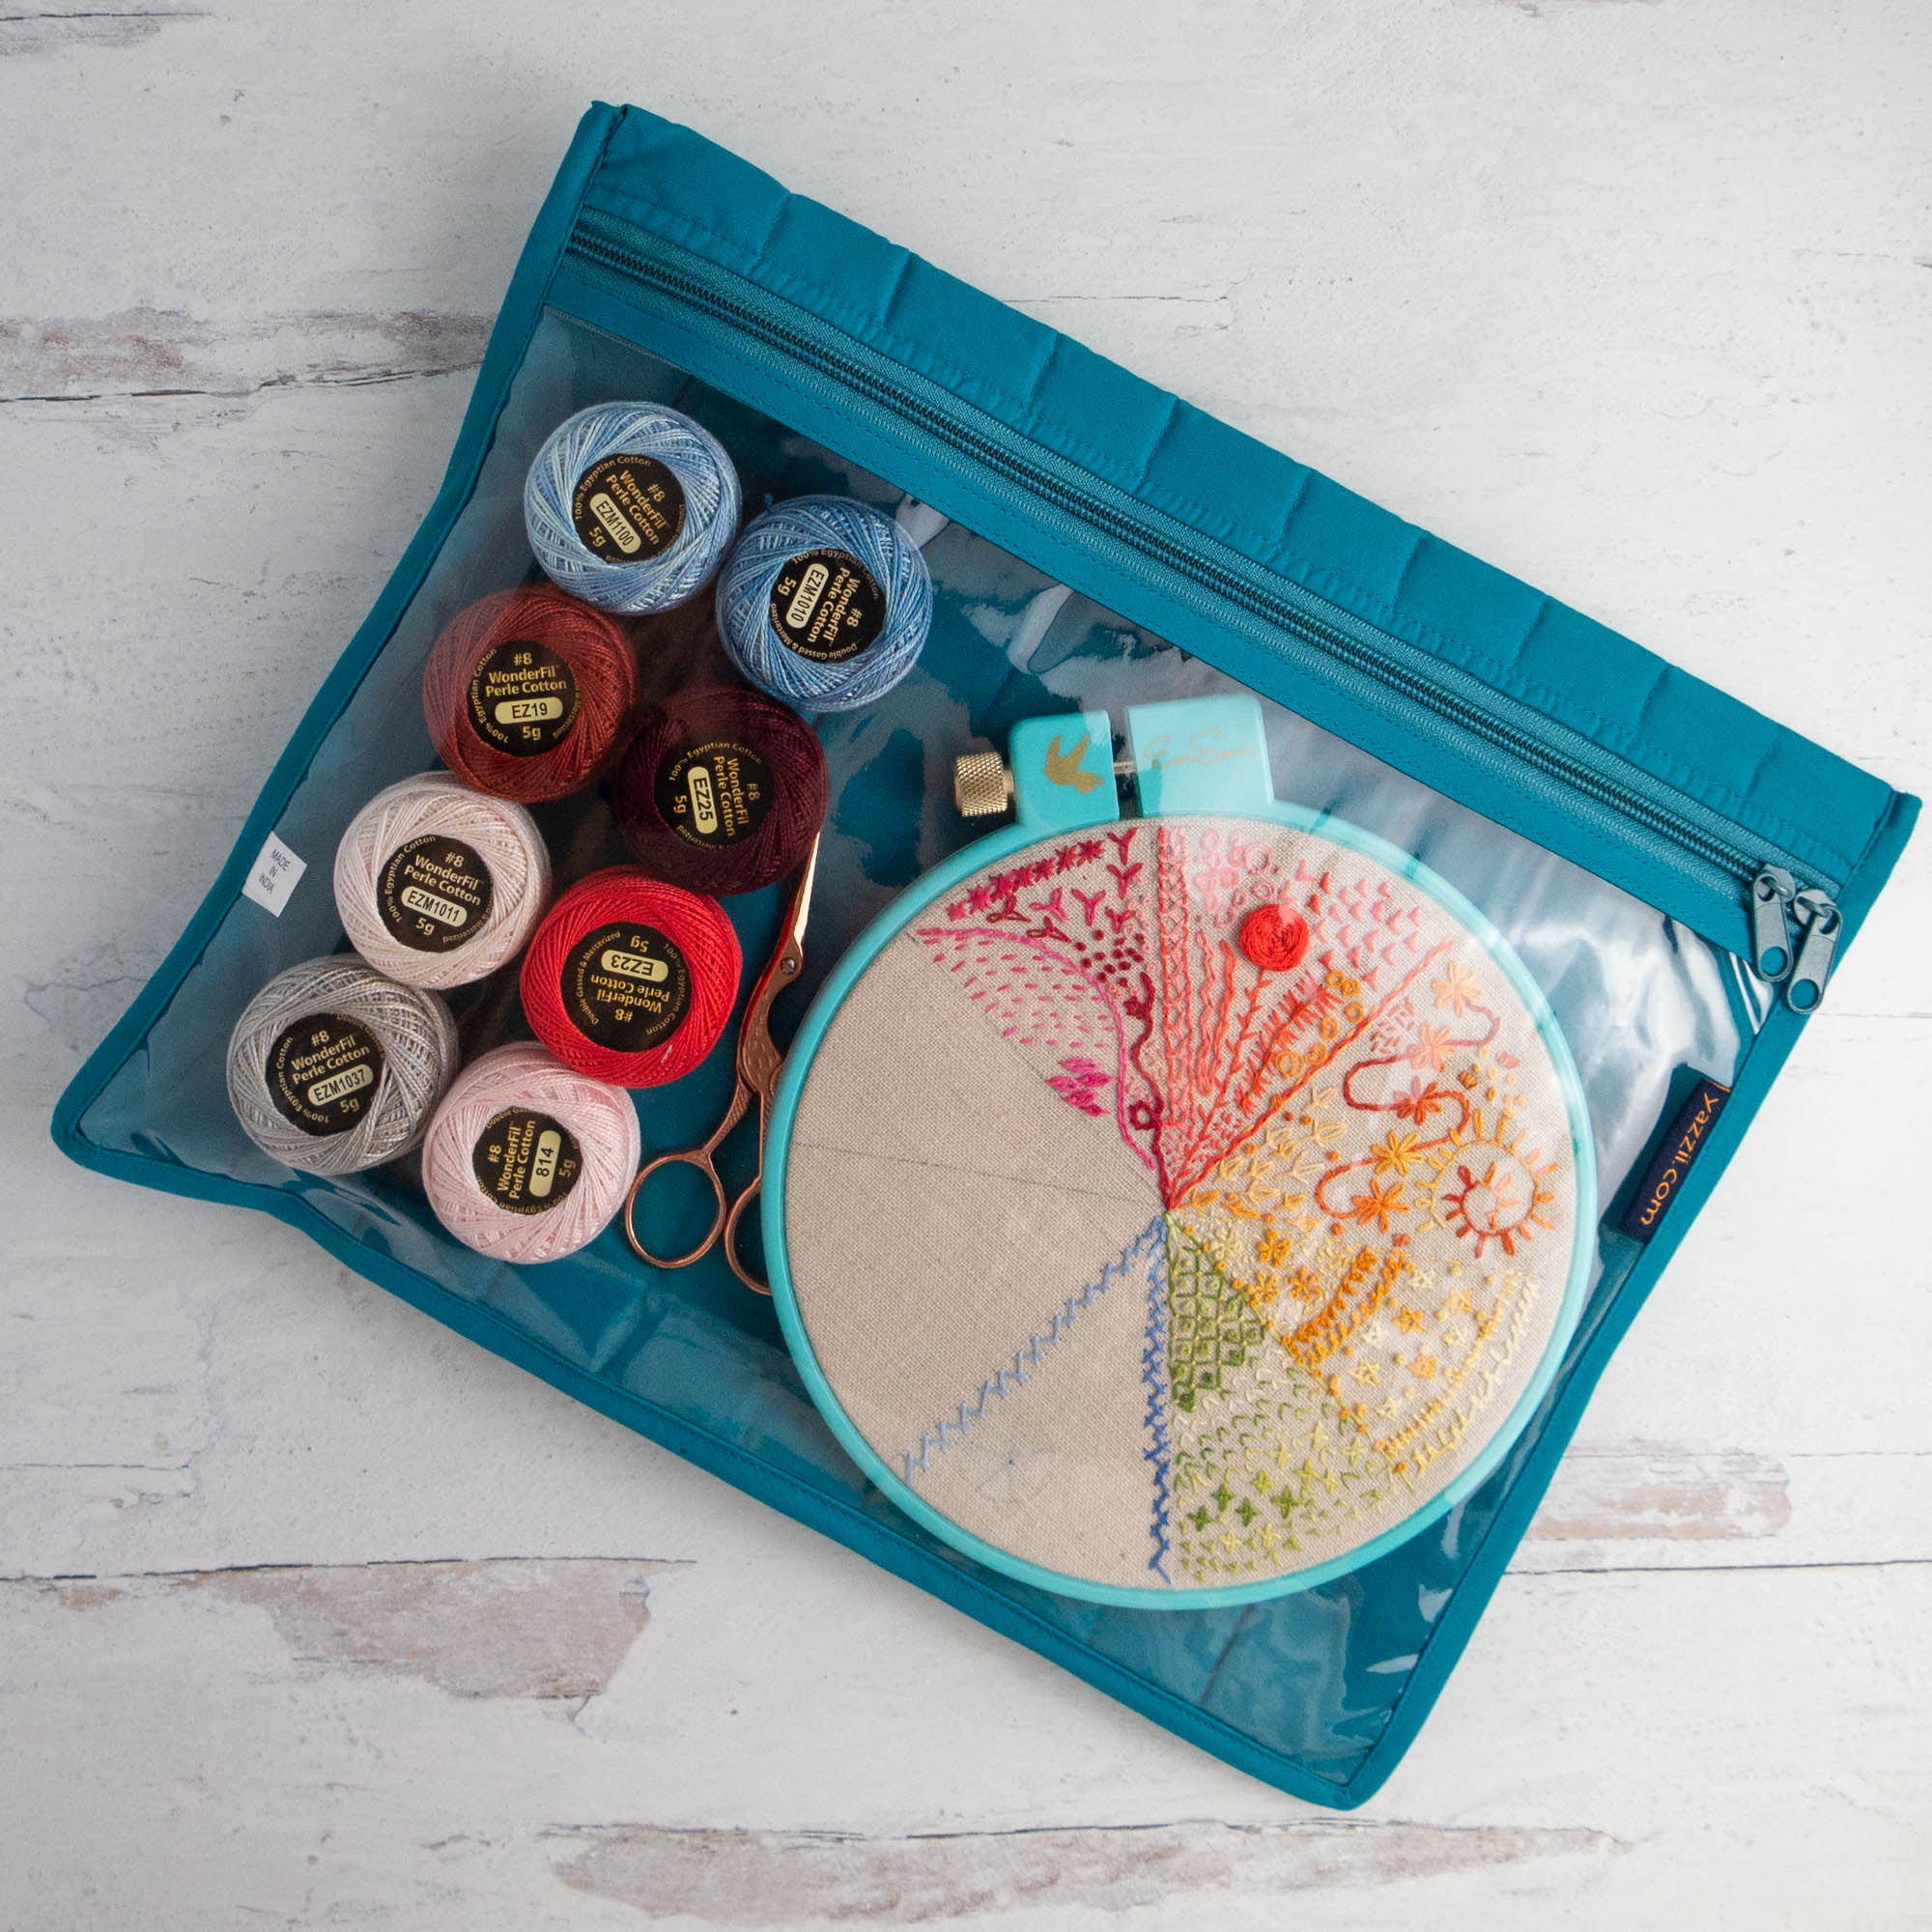 Yazzii Bag - Oval Sewing Box - ON SALE - SAVE 20%